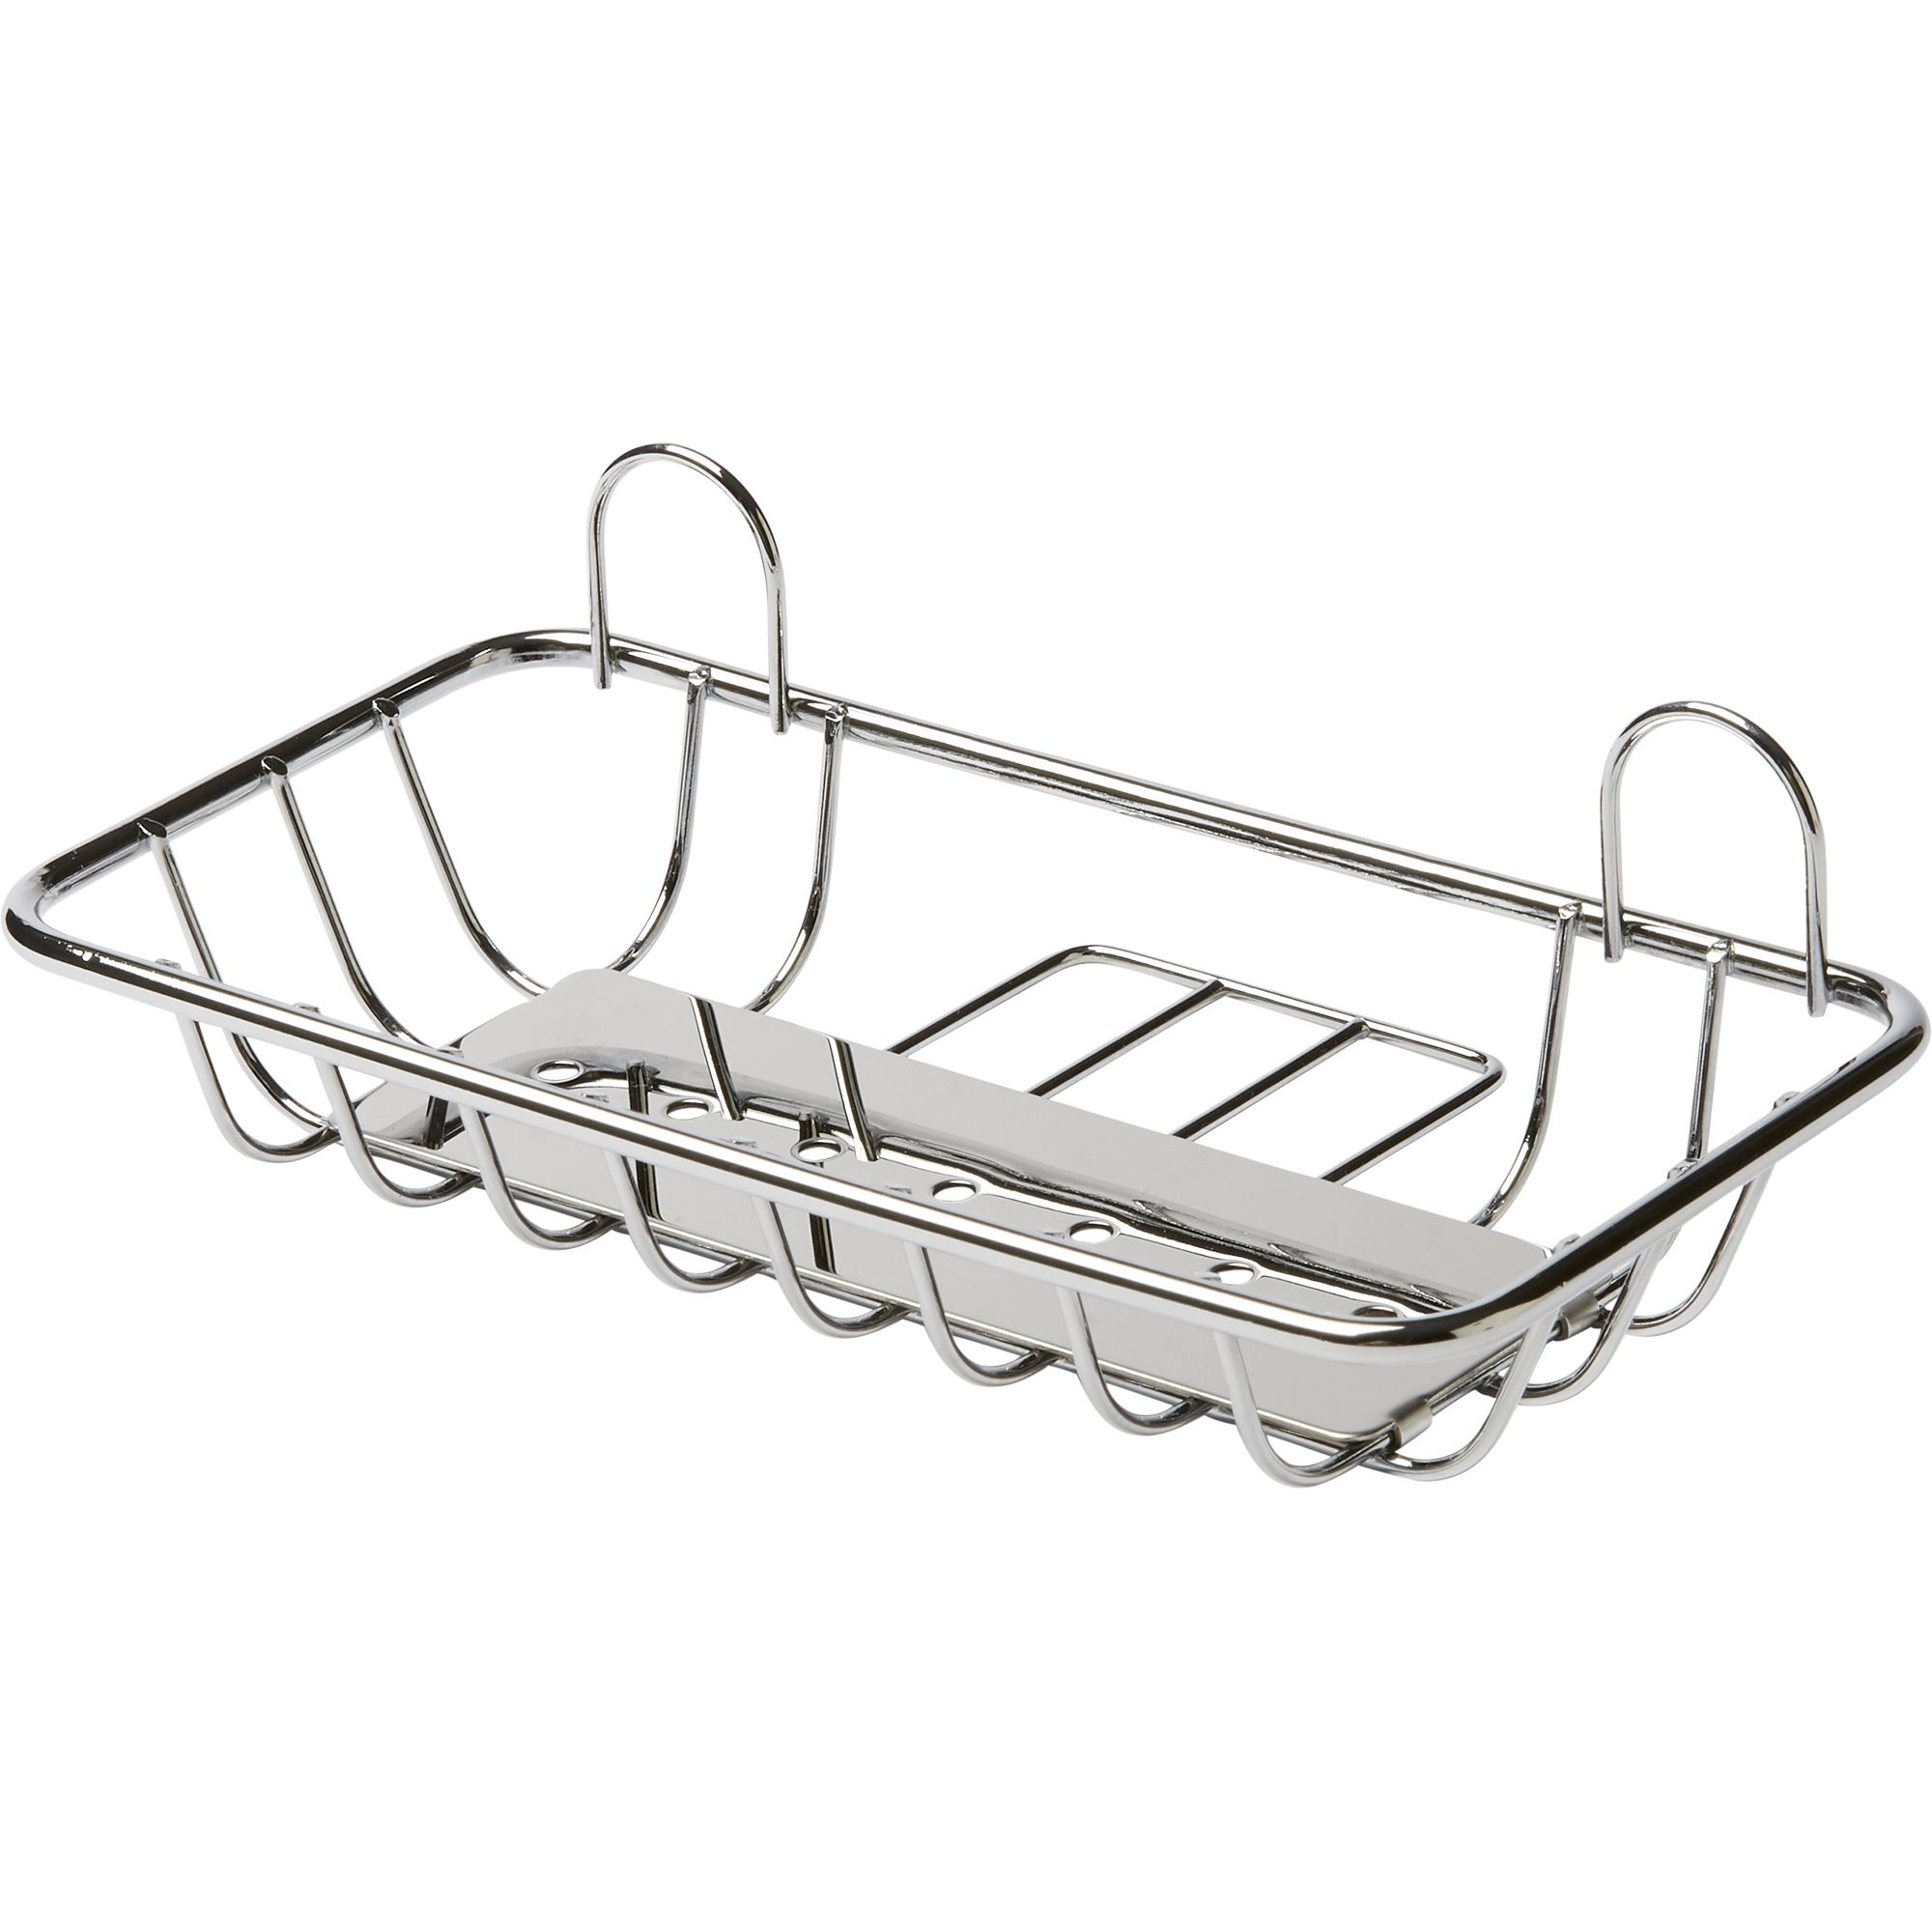 GoodHome Koros Silver effect Steel Soap dish